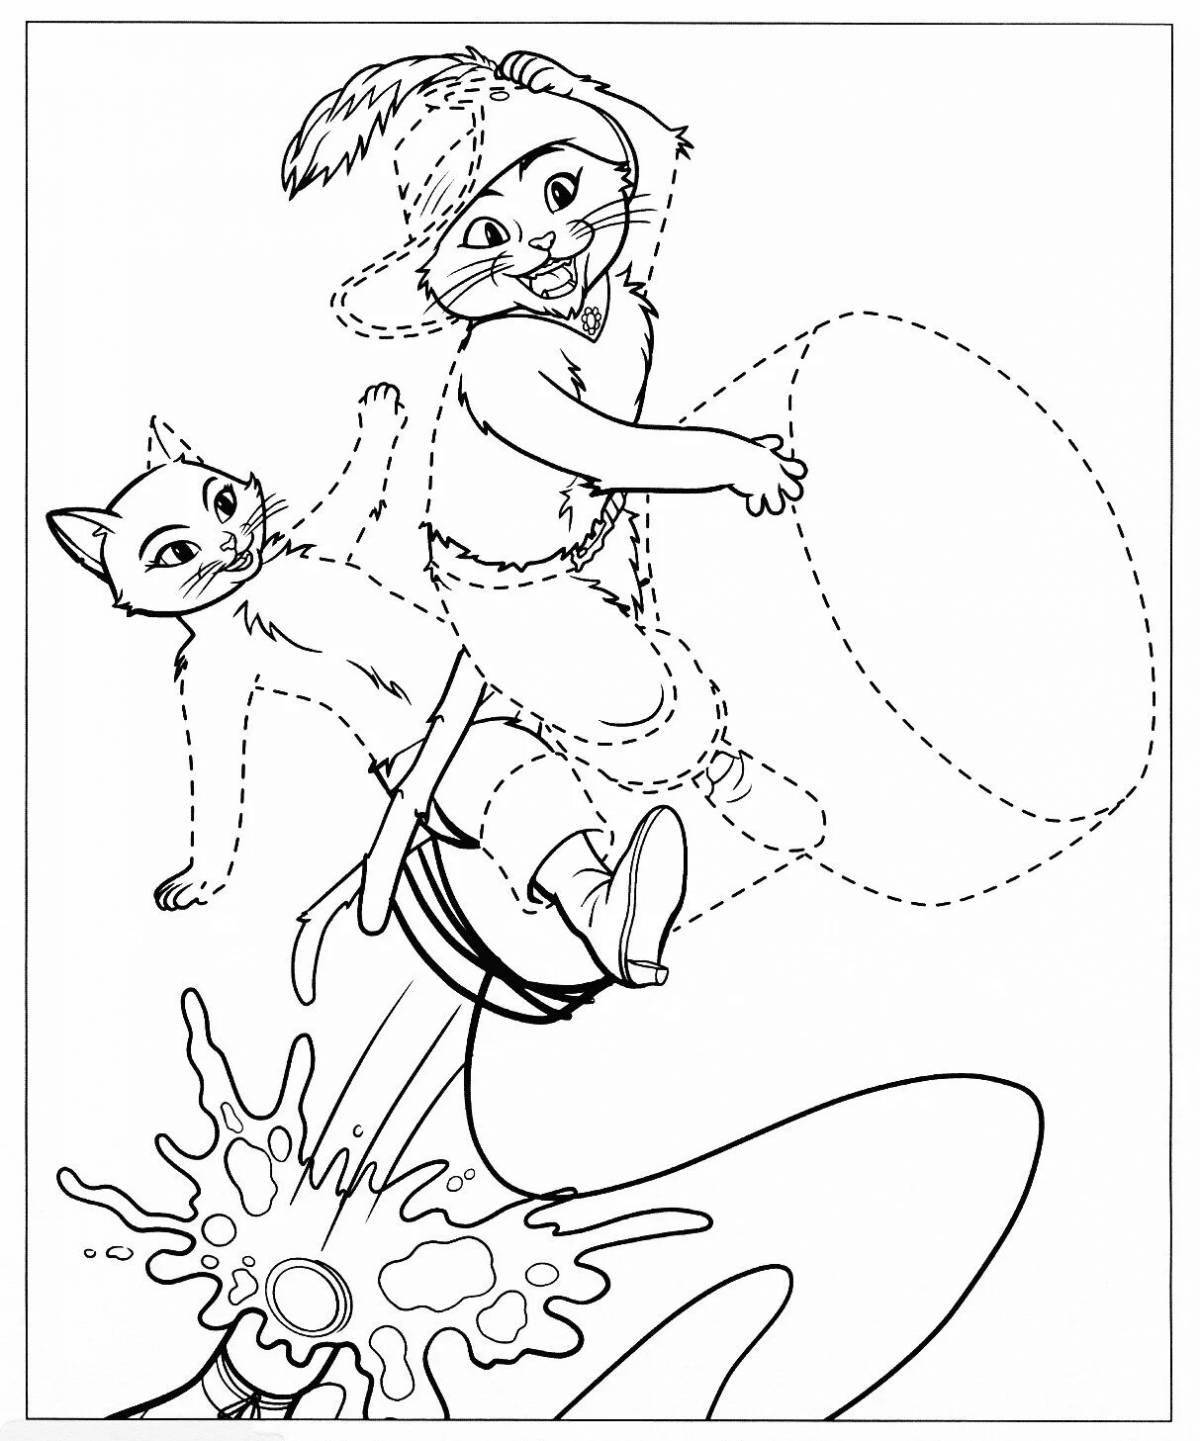 Coloring page dazzling puss in boots